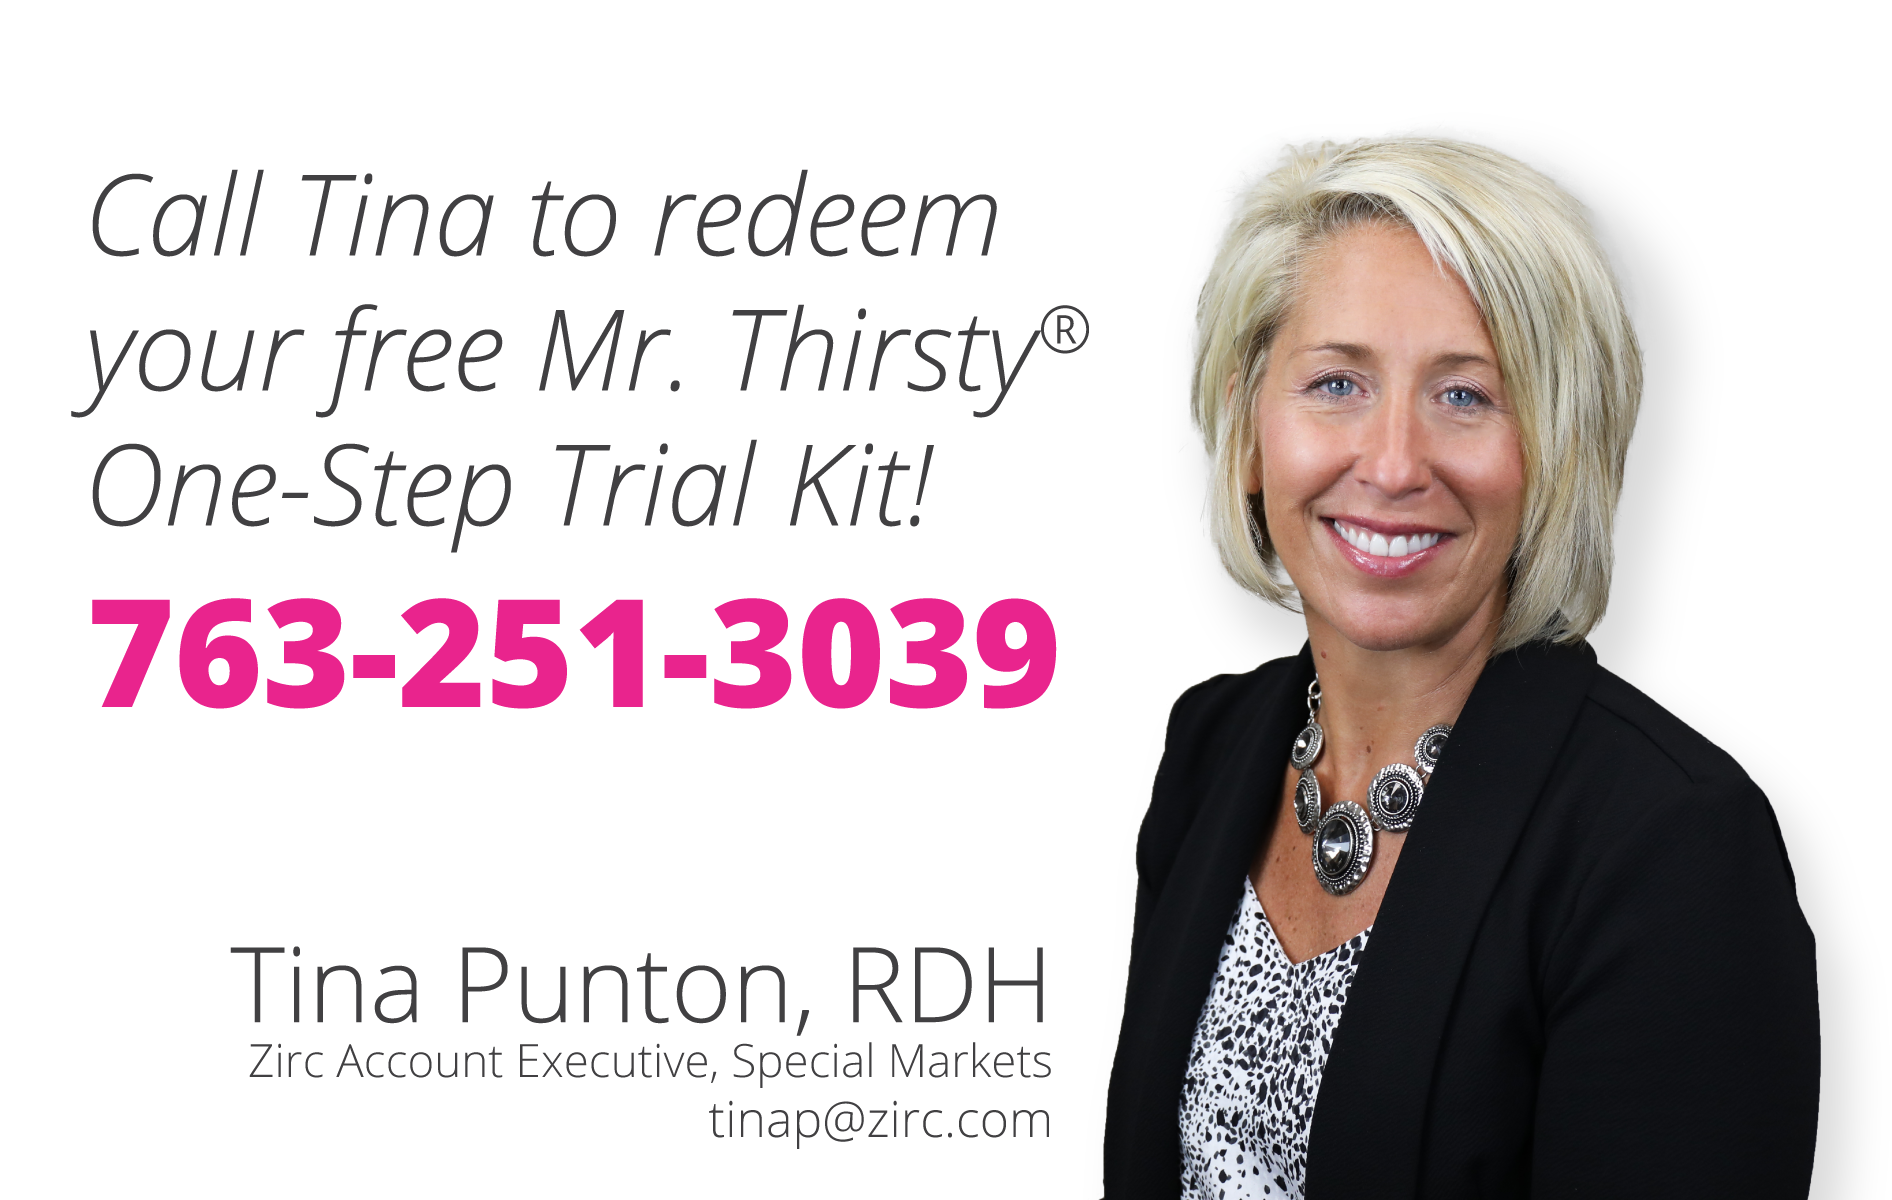 Call Tina to redeem your free Mr. Thirsty® One-Step Trial Kit! 763-251-3039